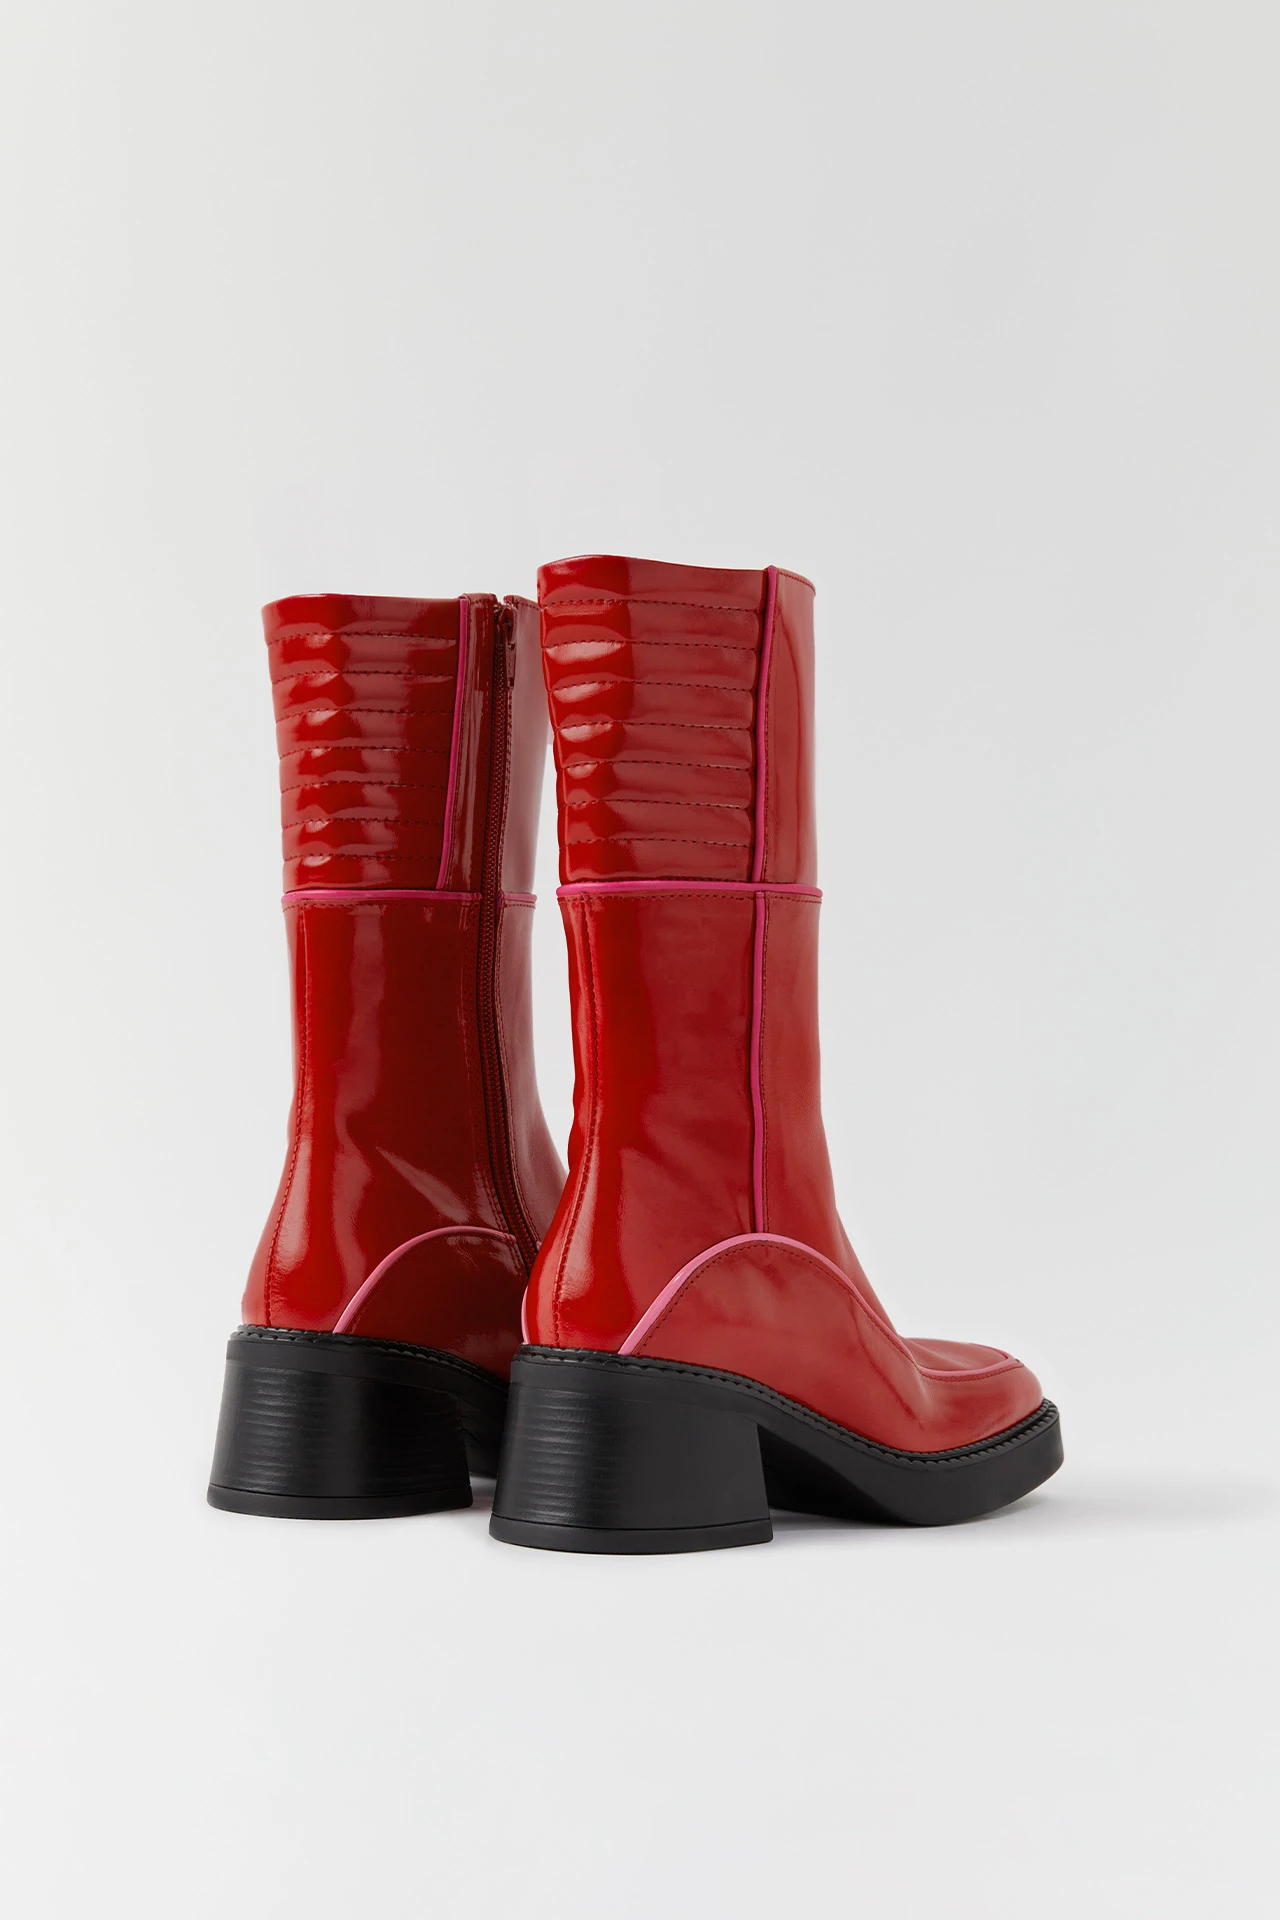 e8-kerri-red-ankle-boots-02